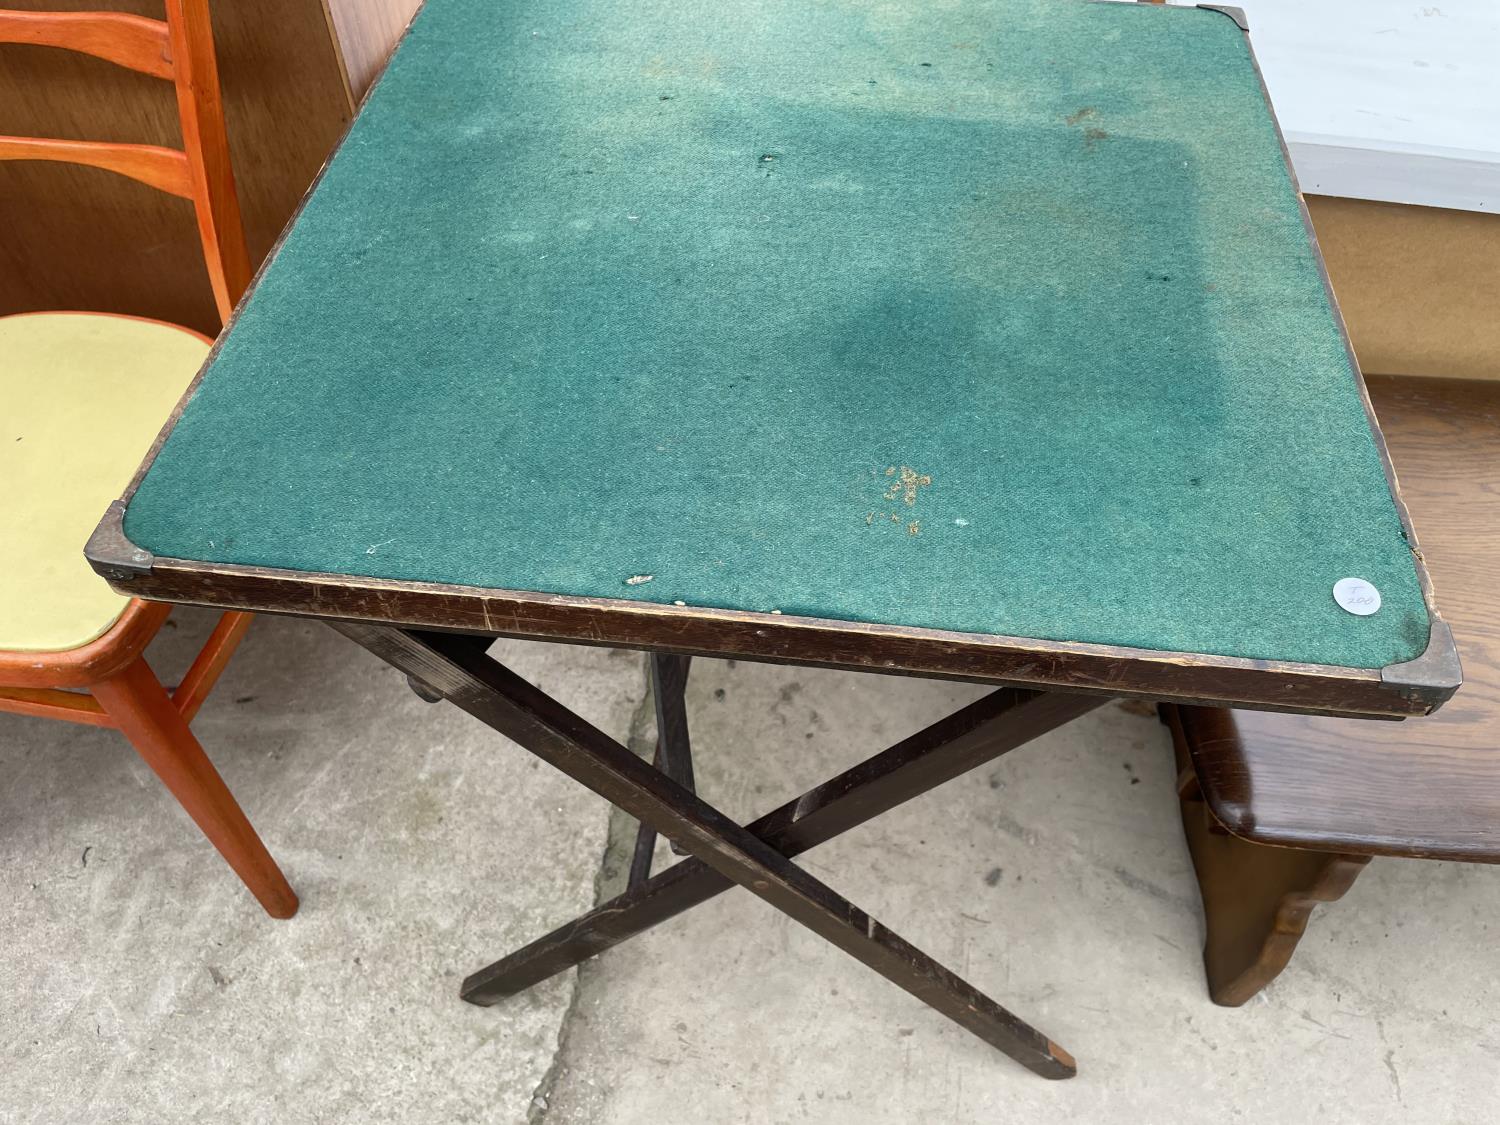 A PAIR OF 20TH CENTURY KITCHEN CHAIRS AND A FOLDING CARD TABLE - Image 3 of 3